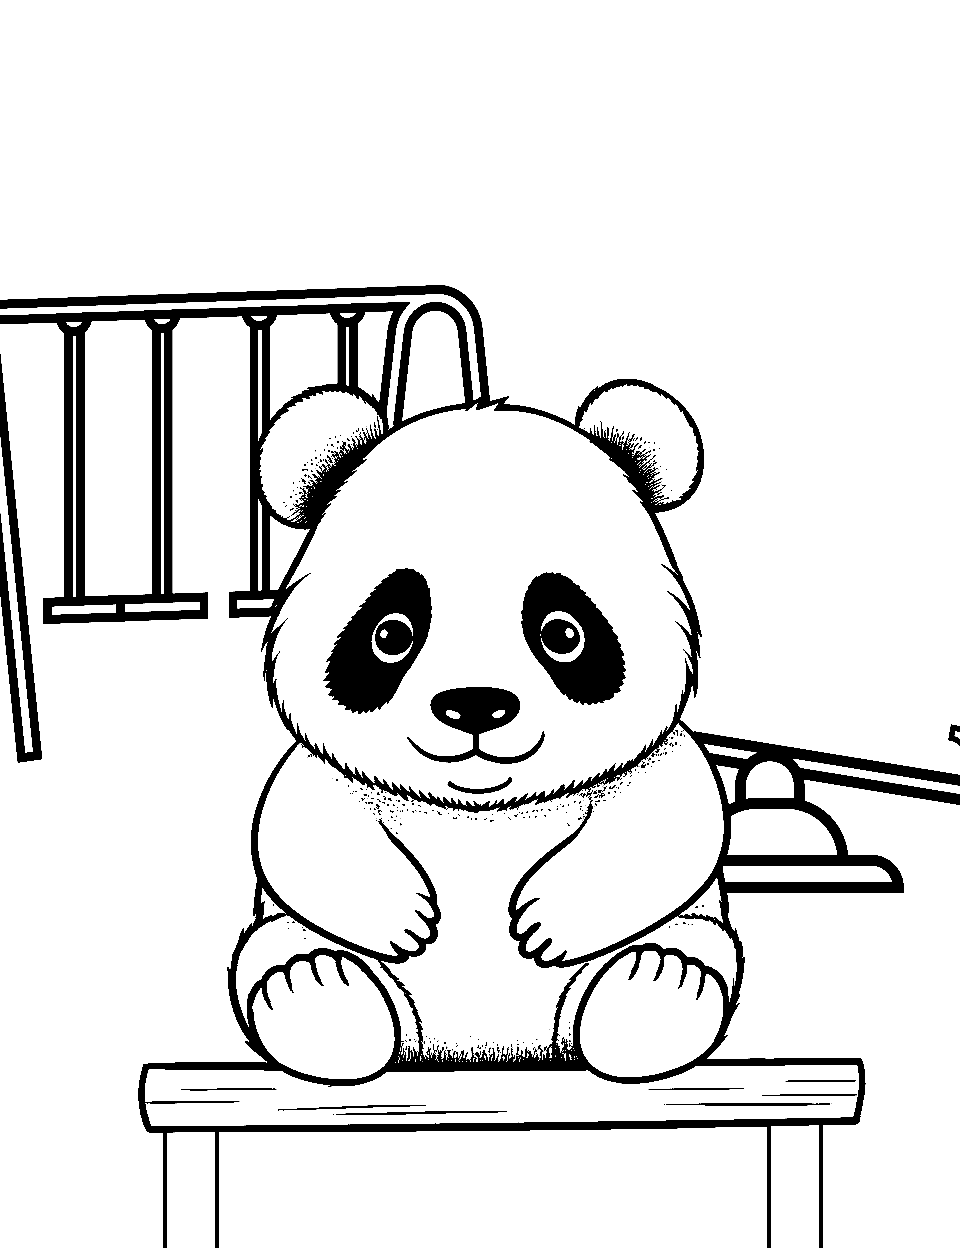 Panda on a Bench Coloring Page - A joyful panda sitting on a bench in a clear playground setting.